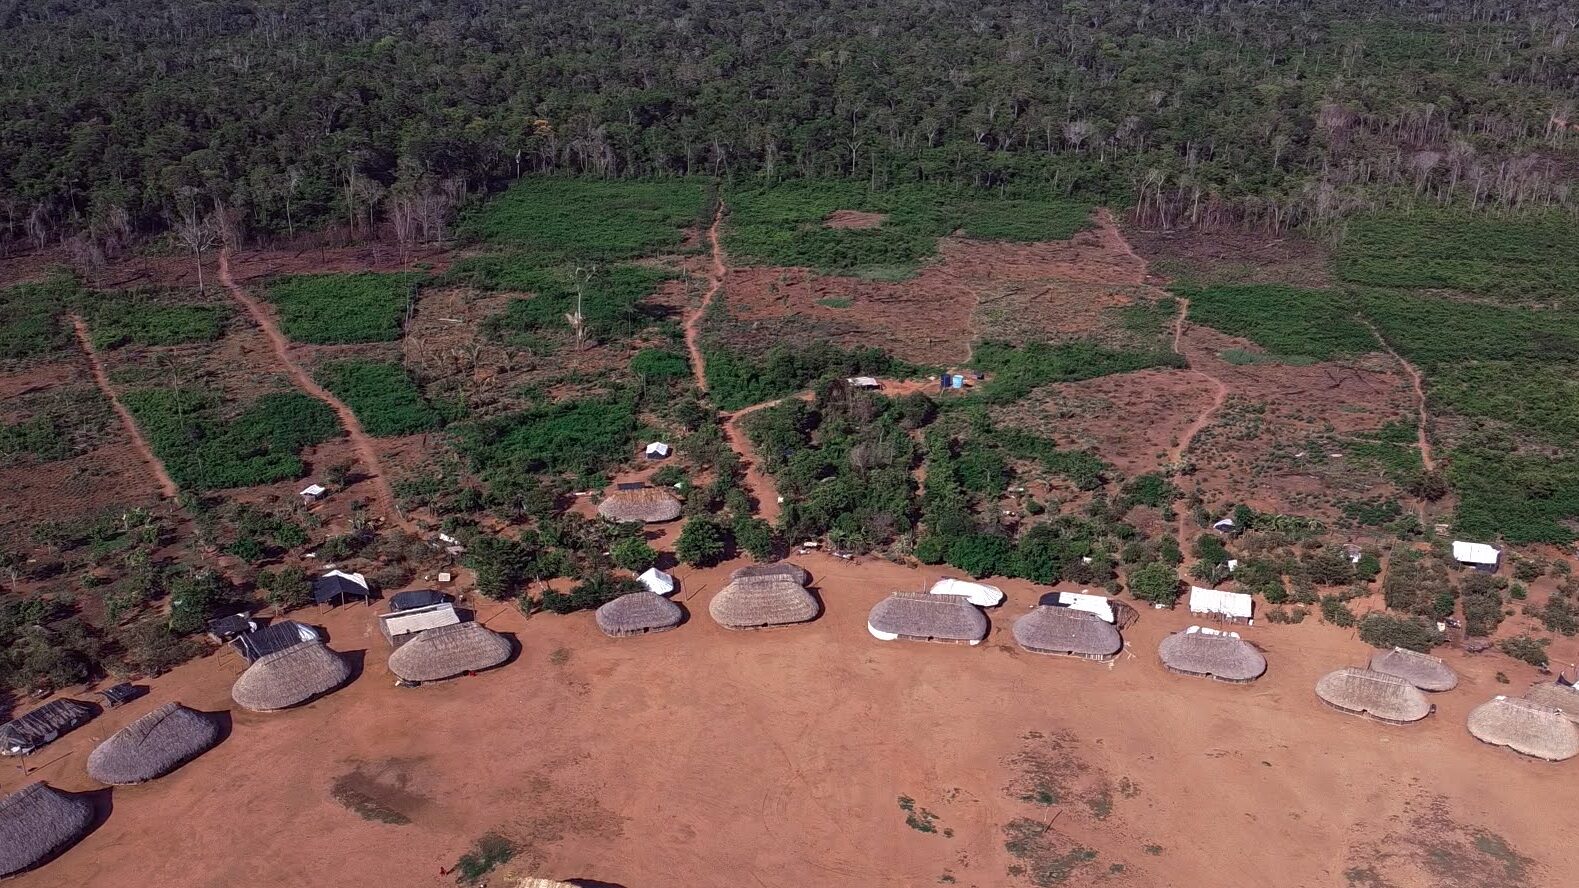 <p>An aerial view of the new Khikatxi village in the Wawi indigenous territory, in Brazil’s Mato Grosso state. The indigenous residents built the buildings from scratch after relocating. (Image: Flávia Milhorance / Diálogo Chino)</p>